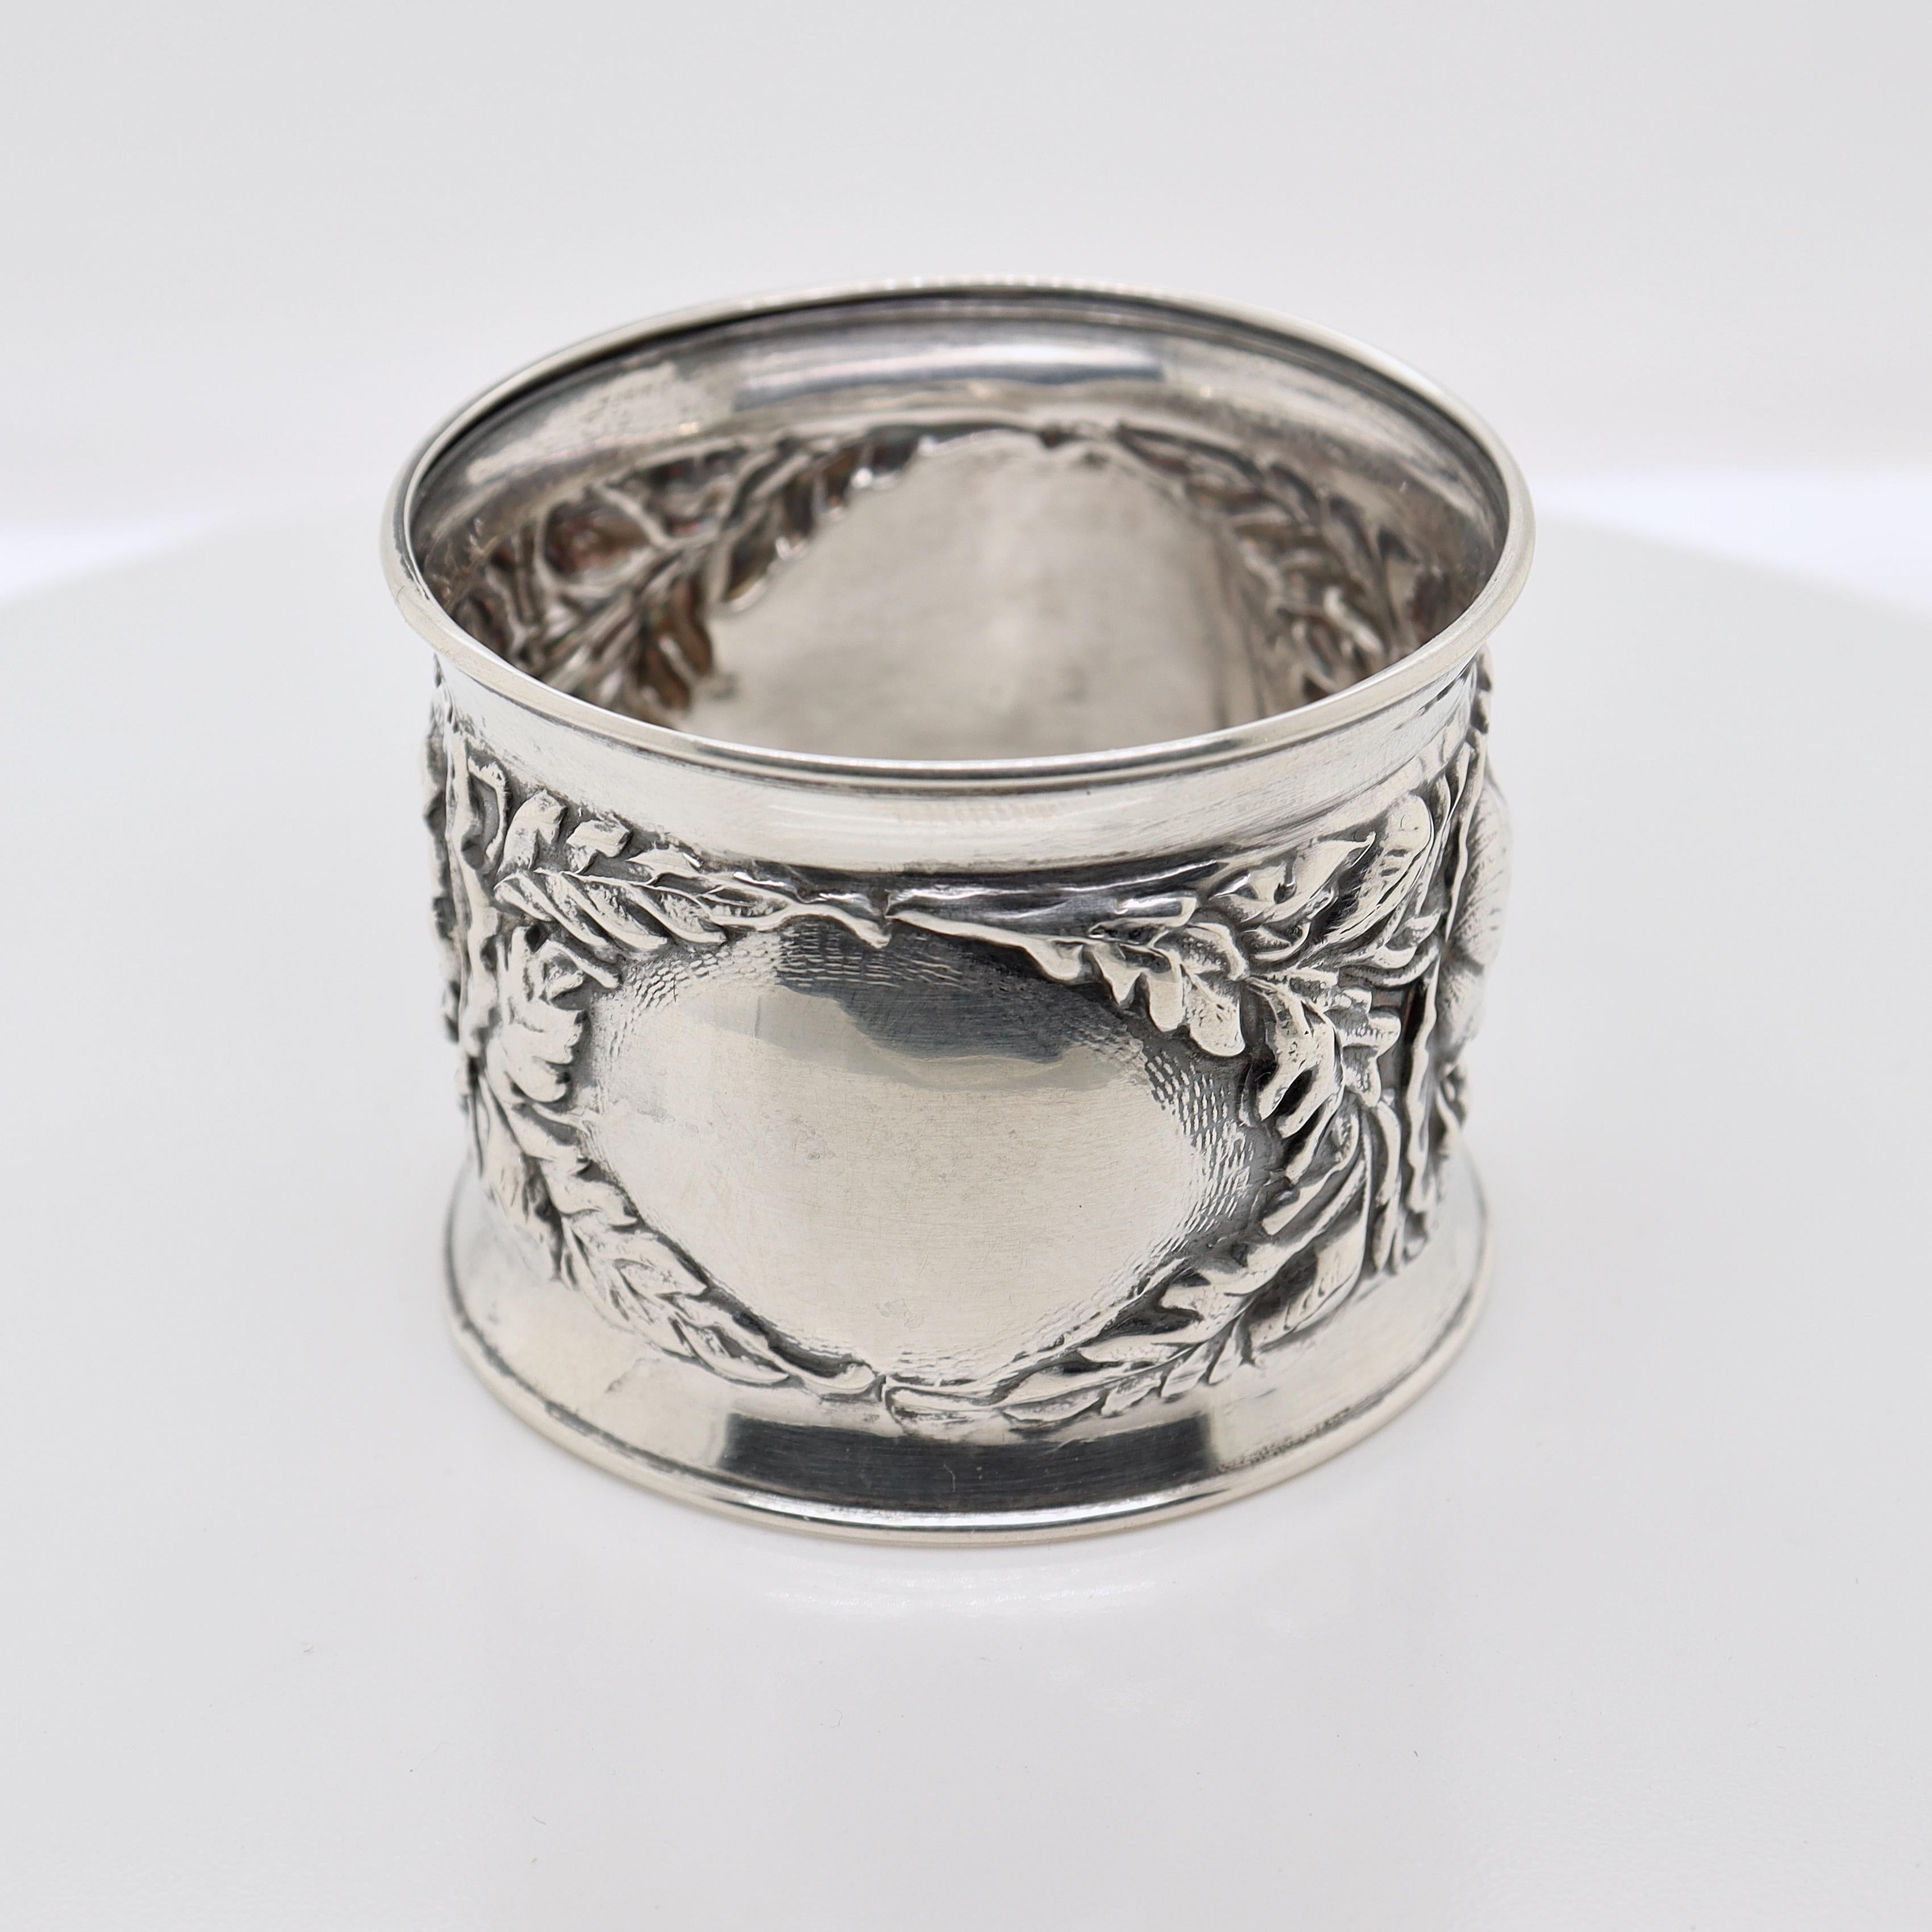 Antique Art Nouveau Sterling Silver Napkin Ring with Poppy Flowers For Sale 2